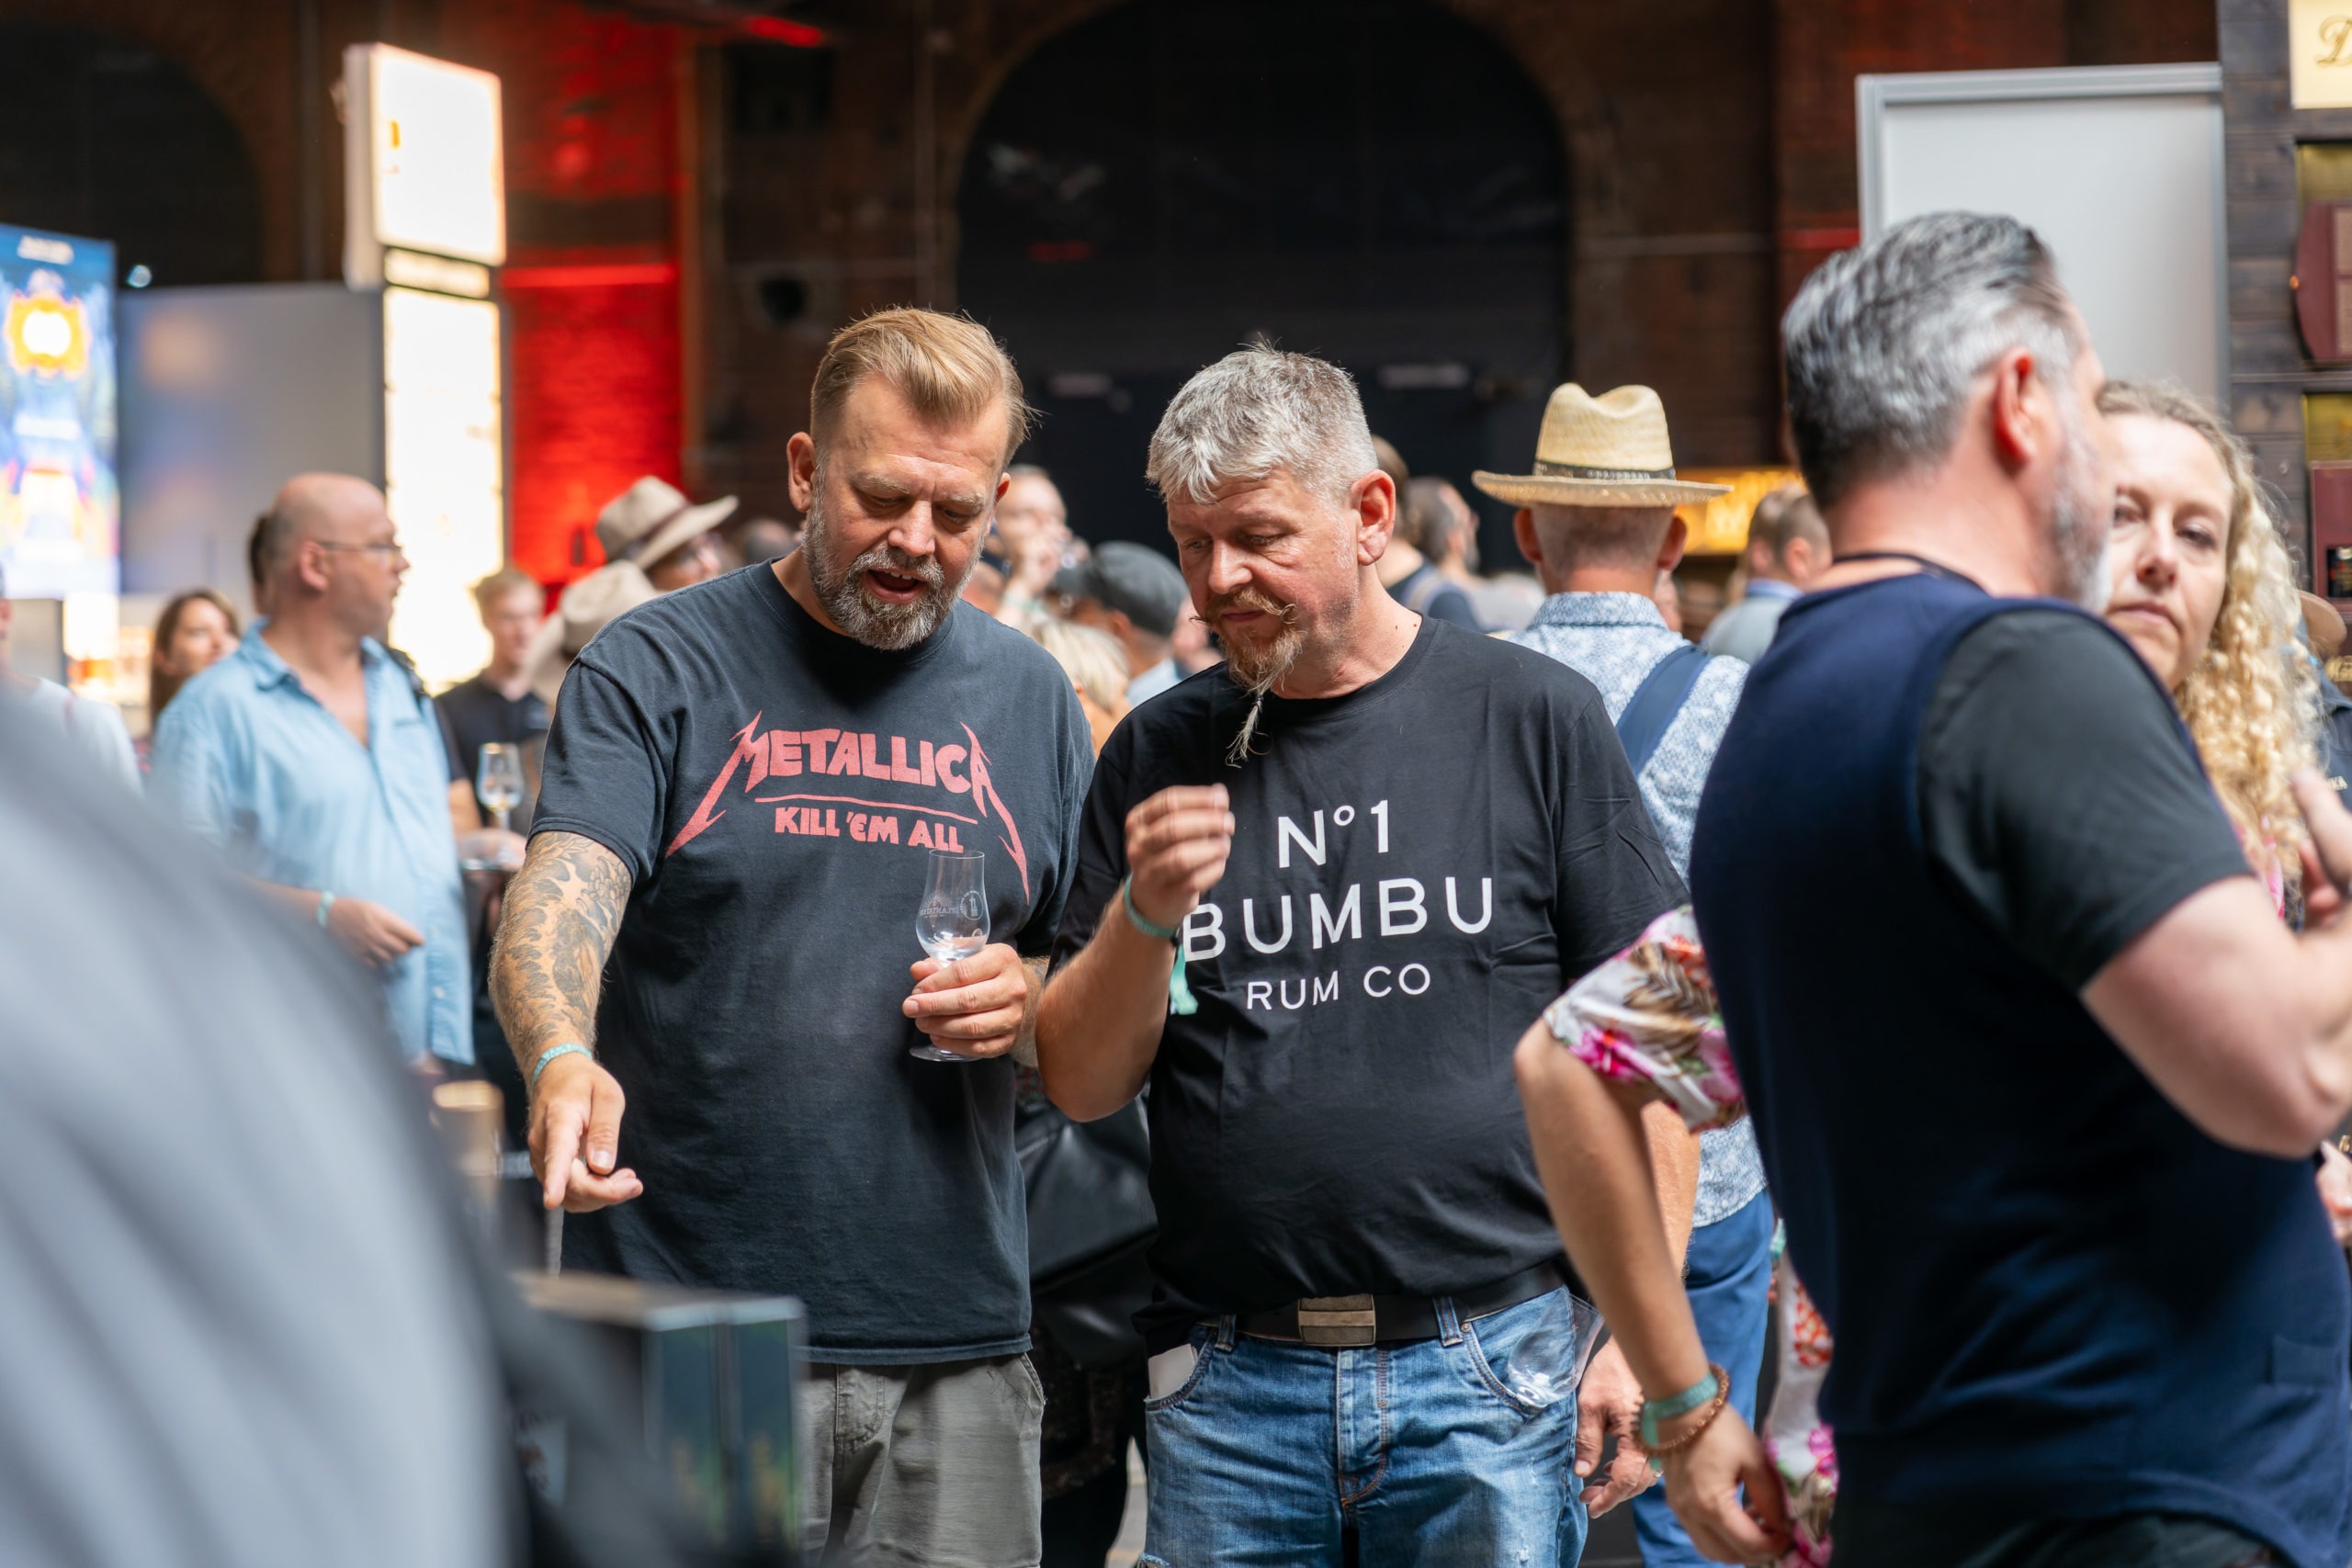 Rumfestival in The Station